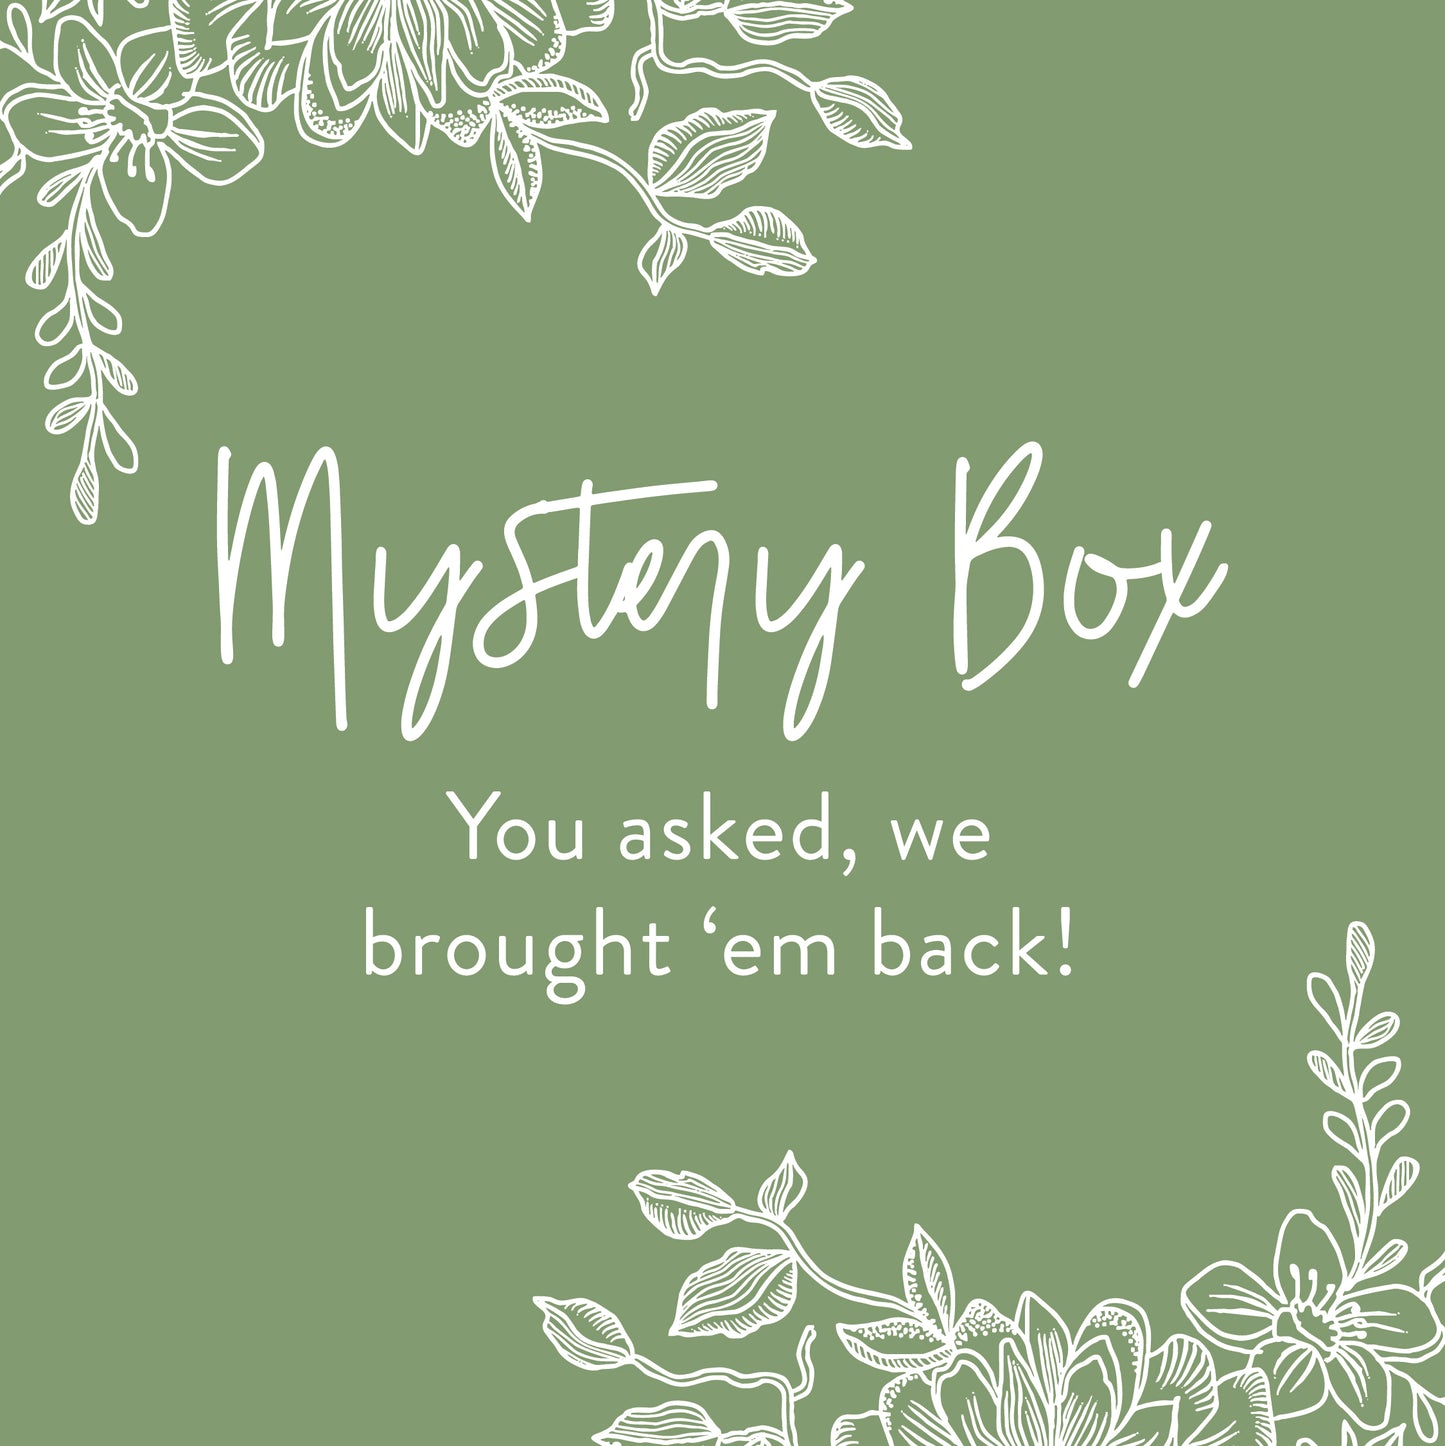 Mystery Boxes!